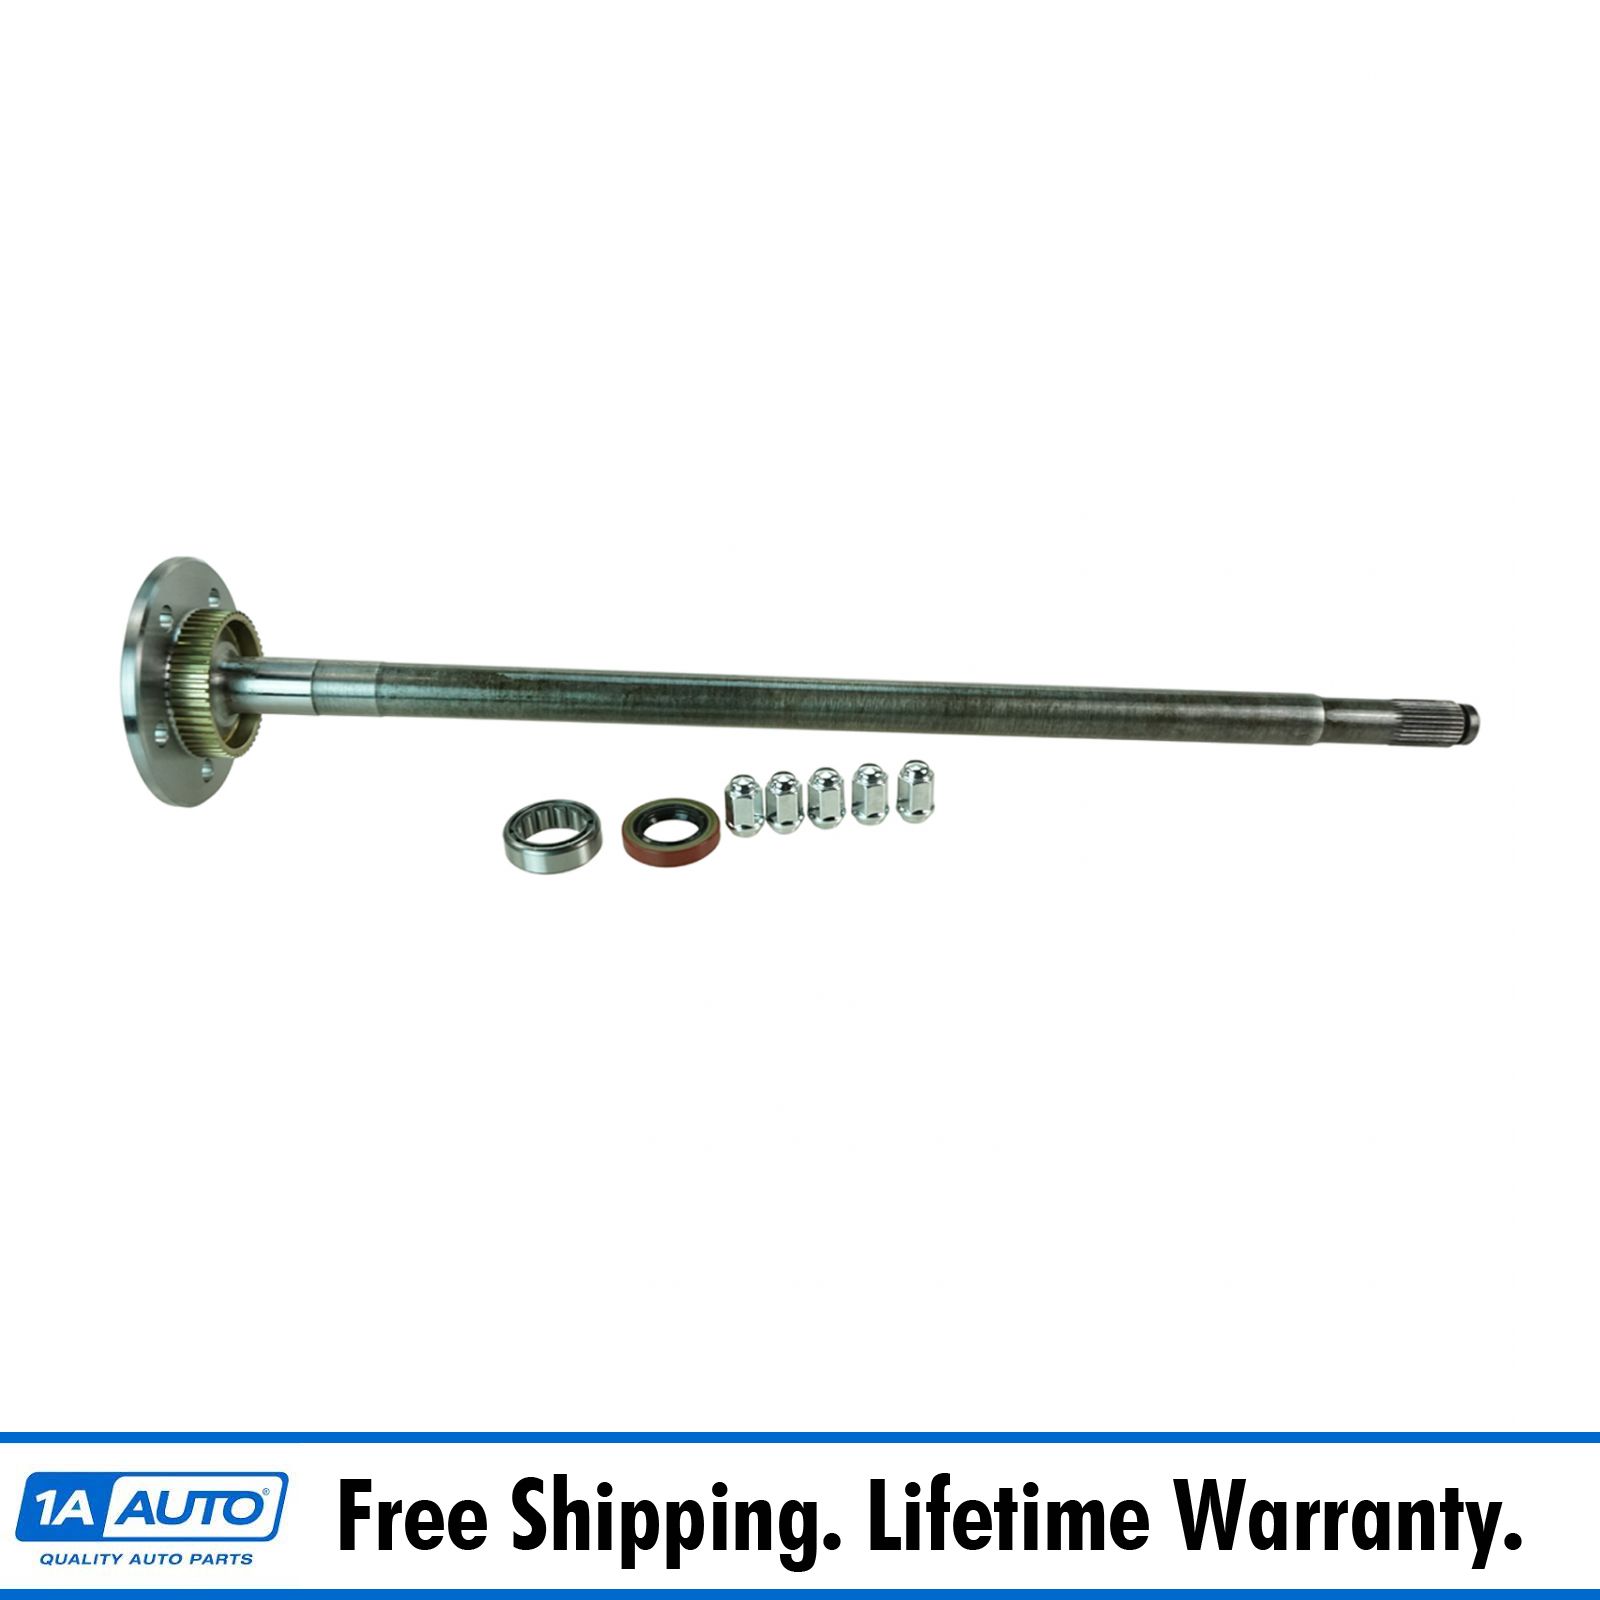 Complete Rear Axle Kit For 2006-2011 Crown Victoria Grand Marquis Town Car